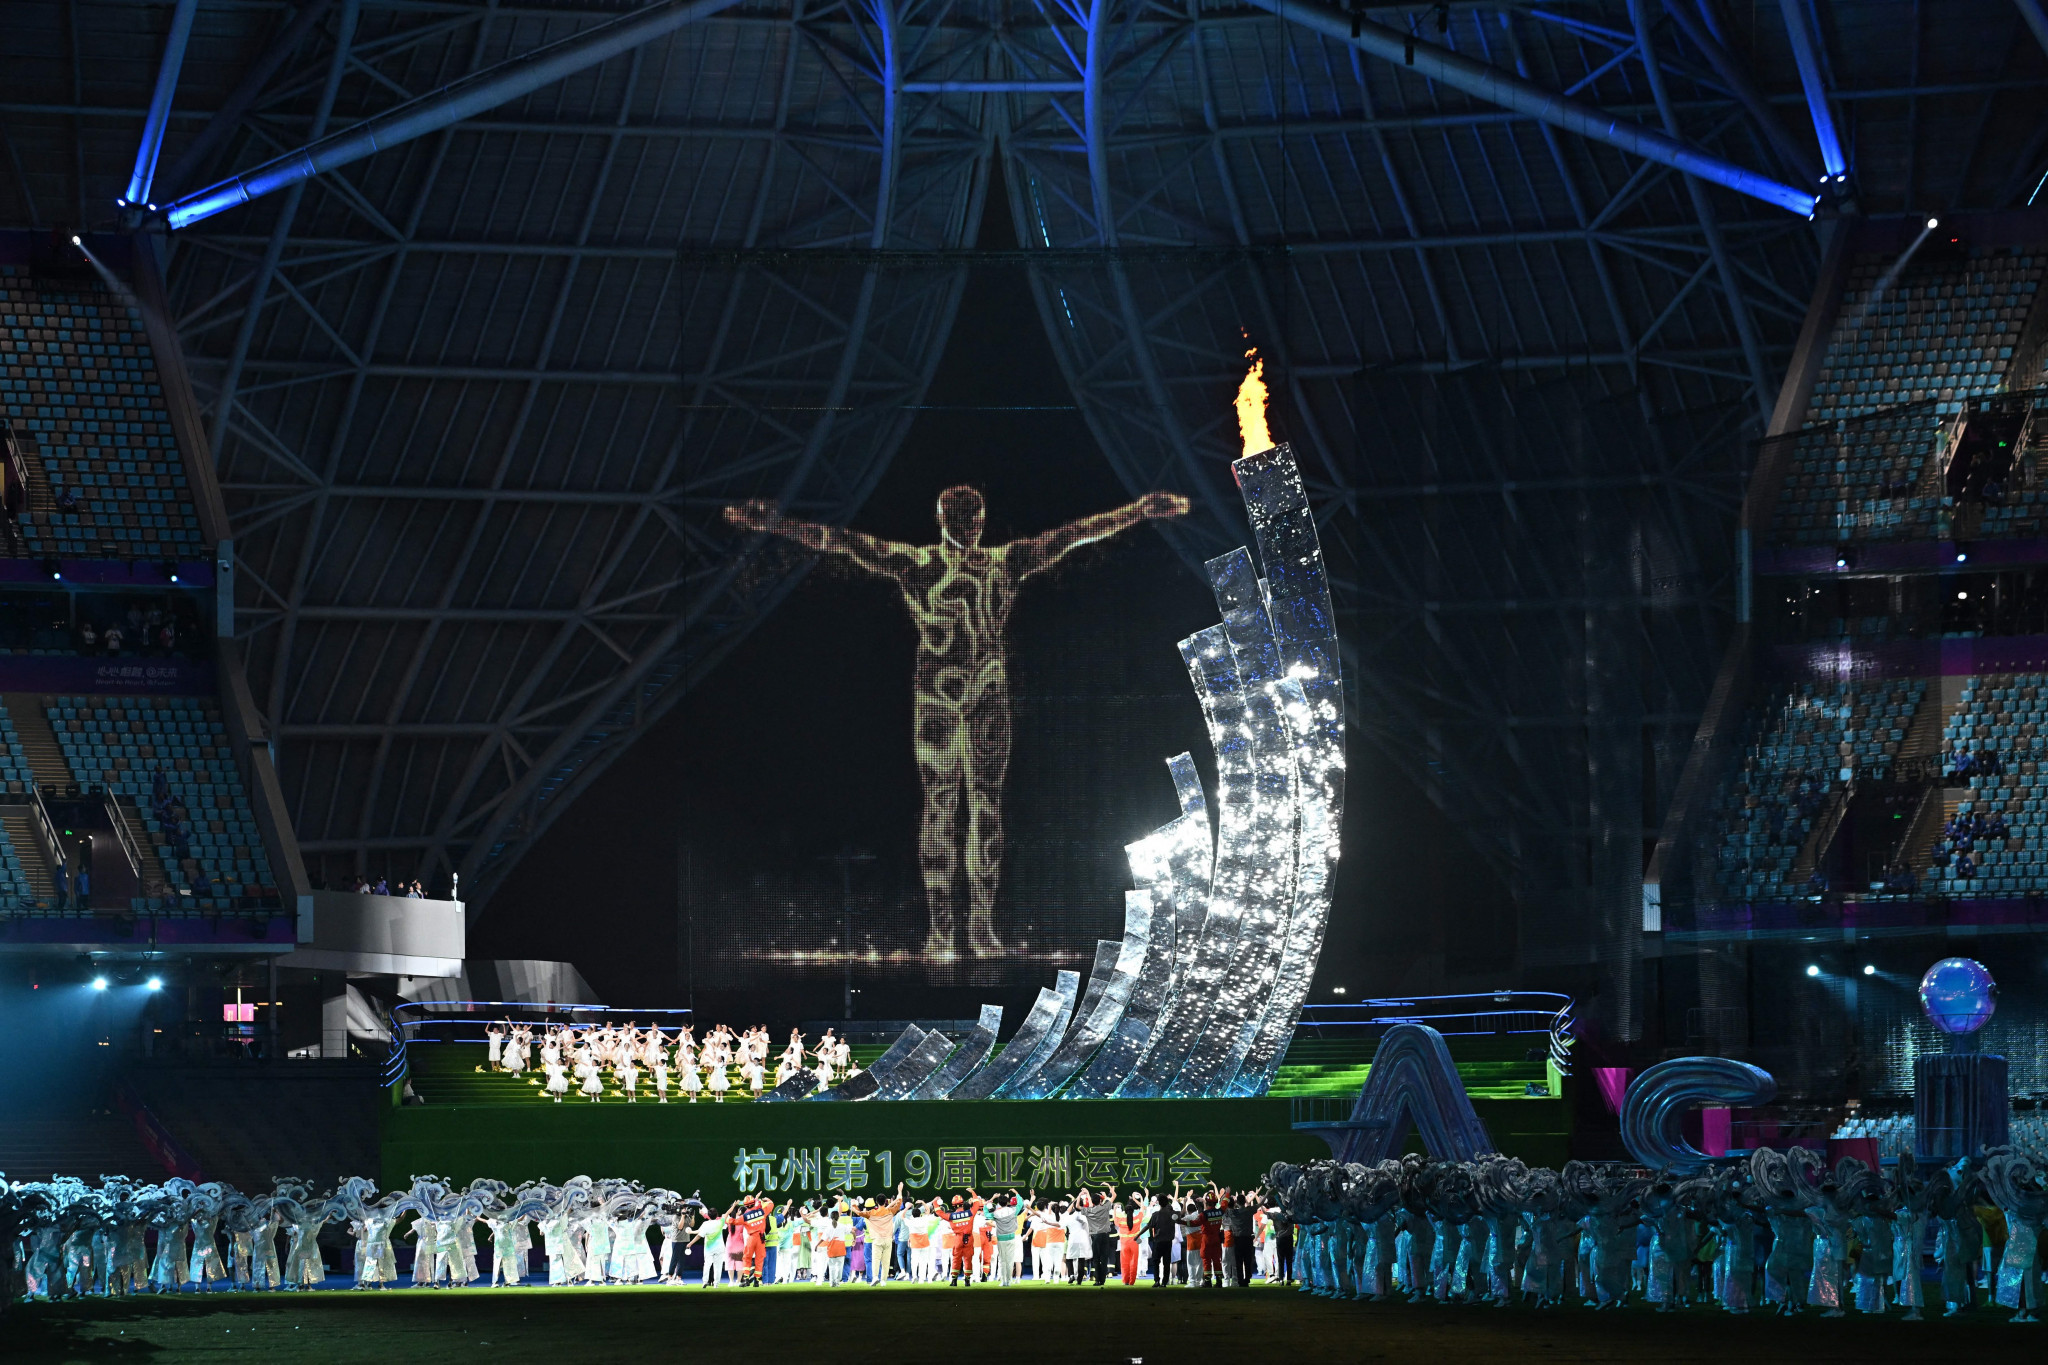 The Hangzhou 2022 digital torchbearer played a part in the Closing Ceremony after also featuring in the opener on September 23 ©Getty Images